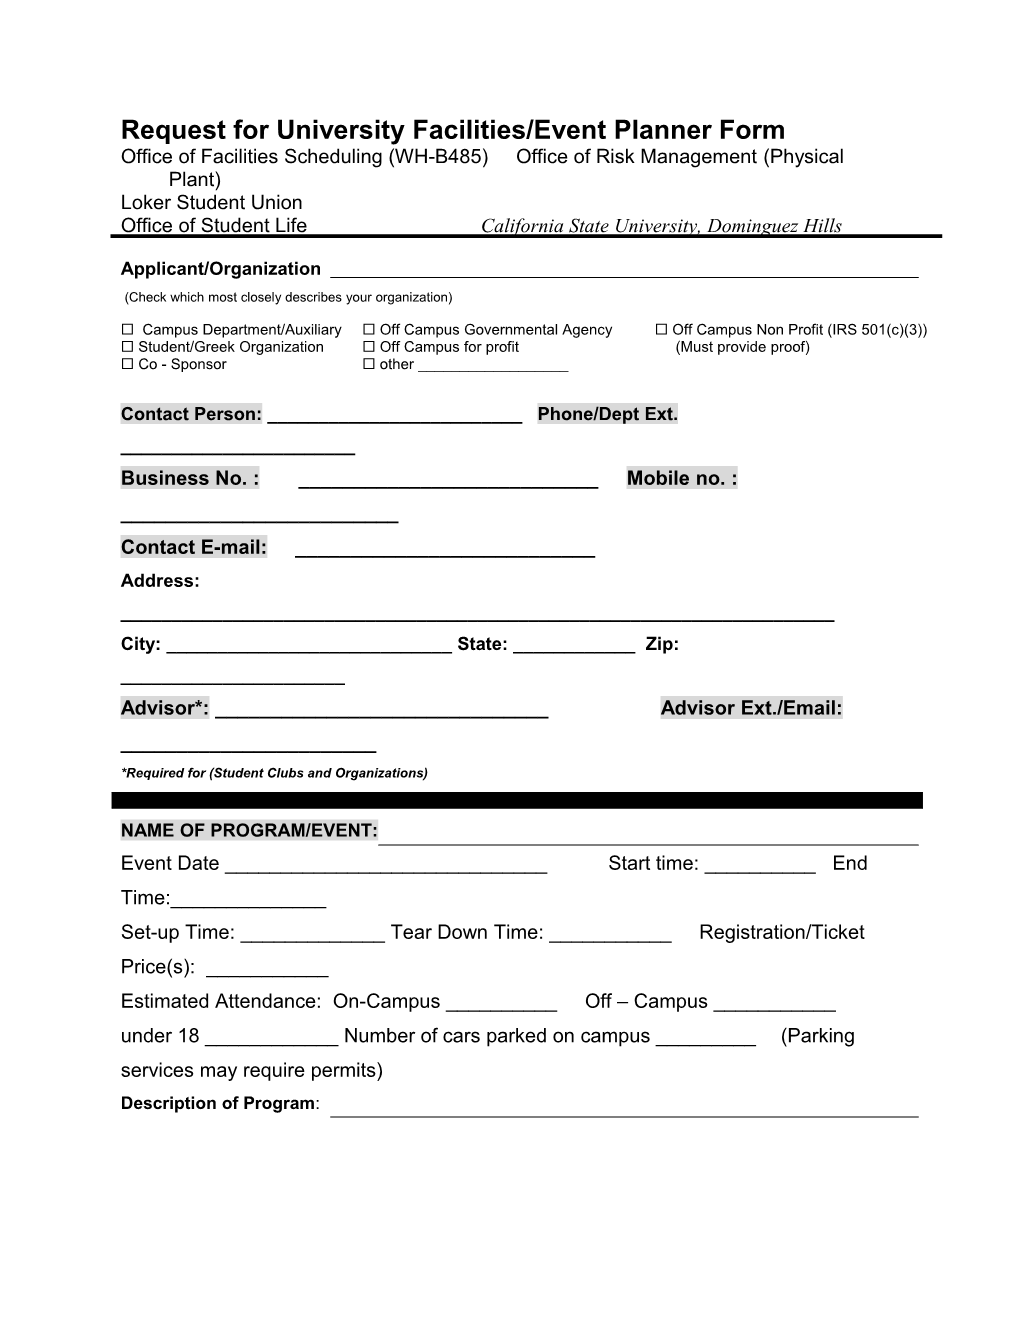 Request for University Facilities/Event Planner Form